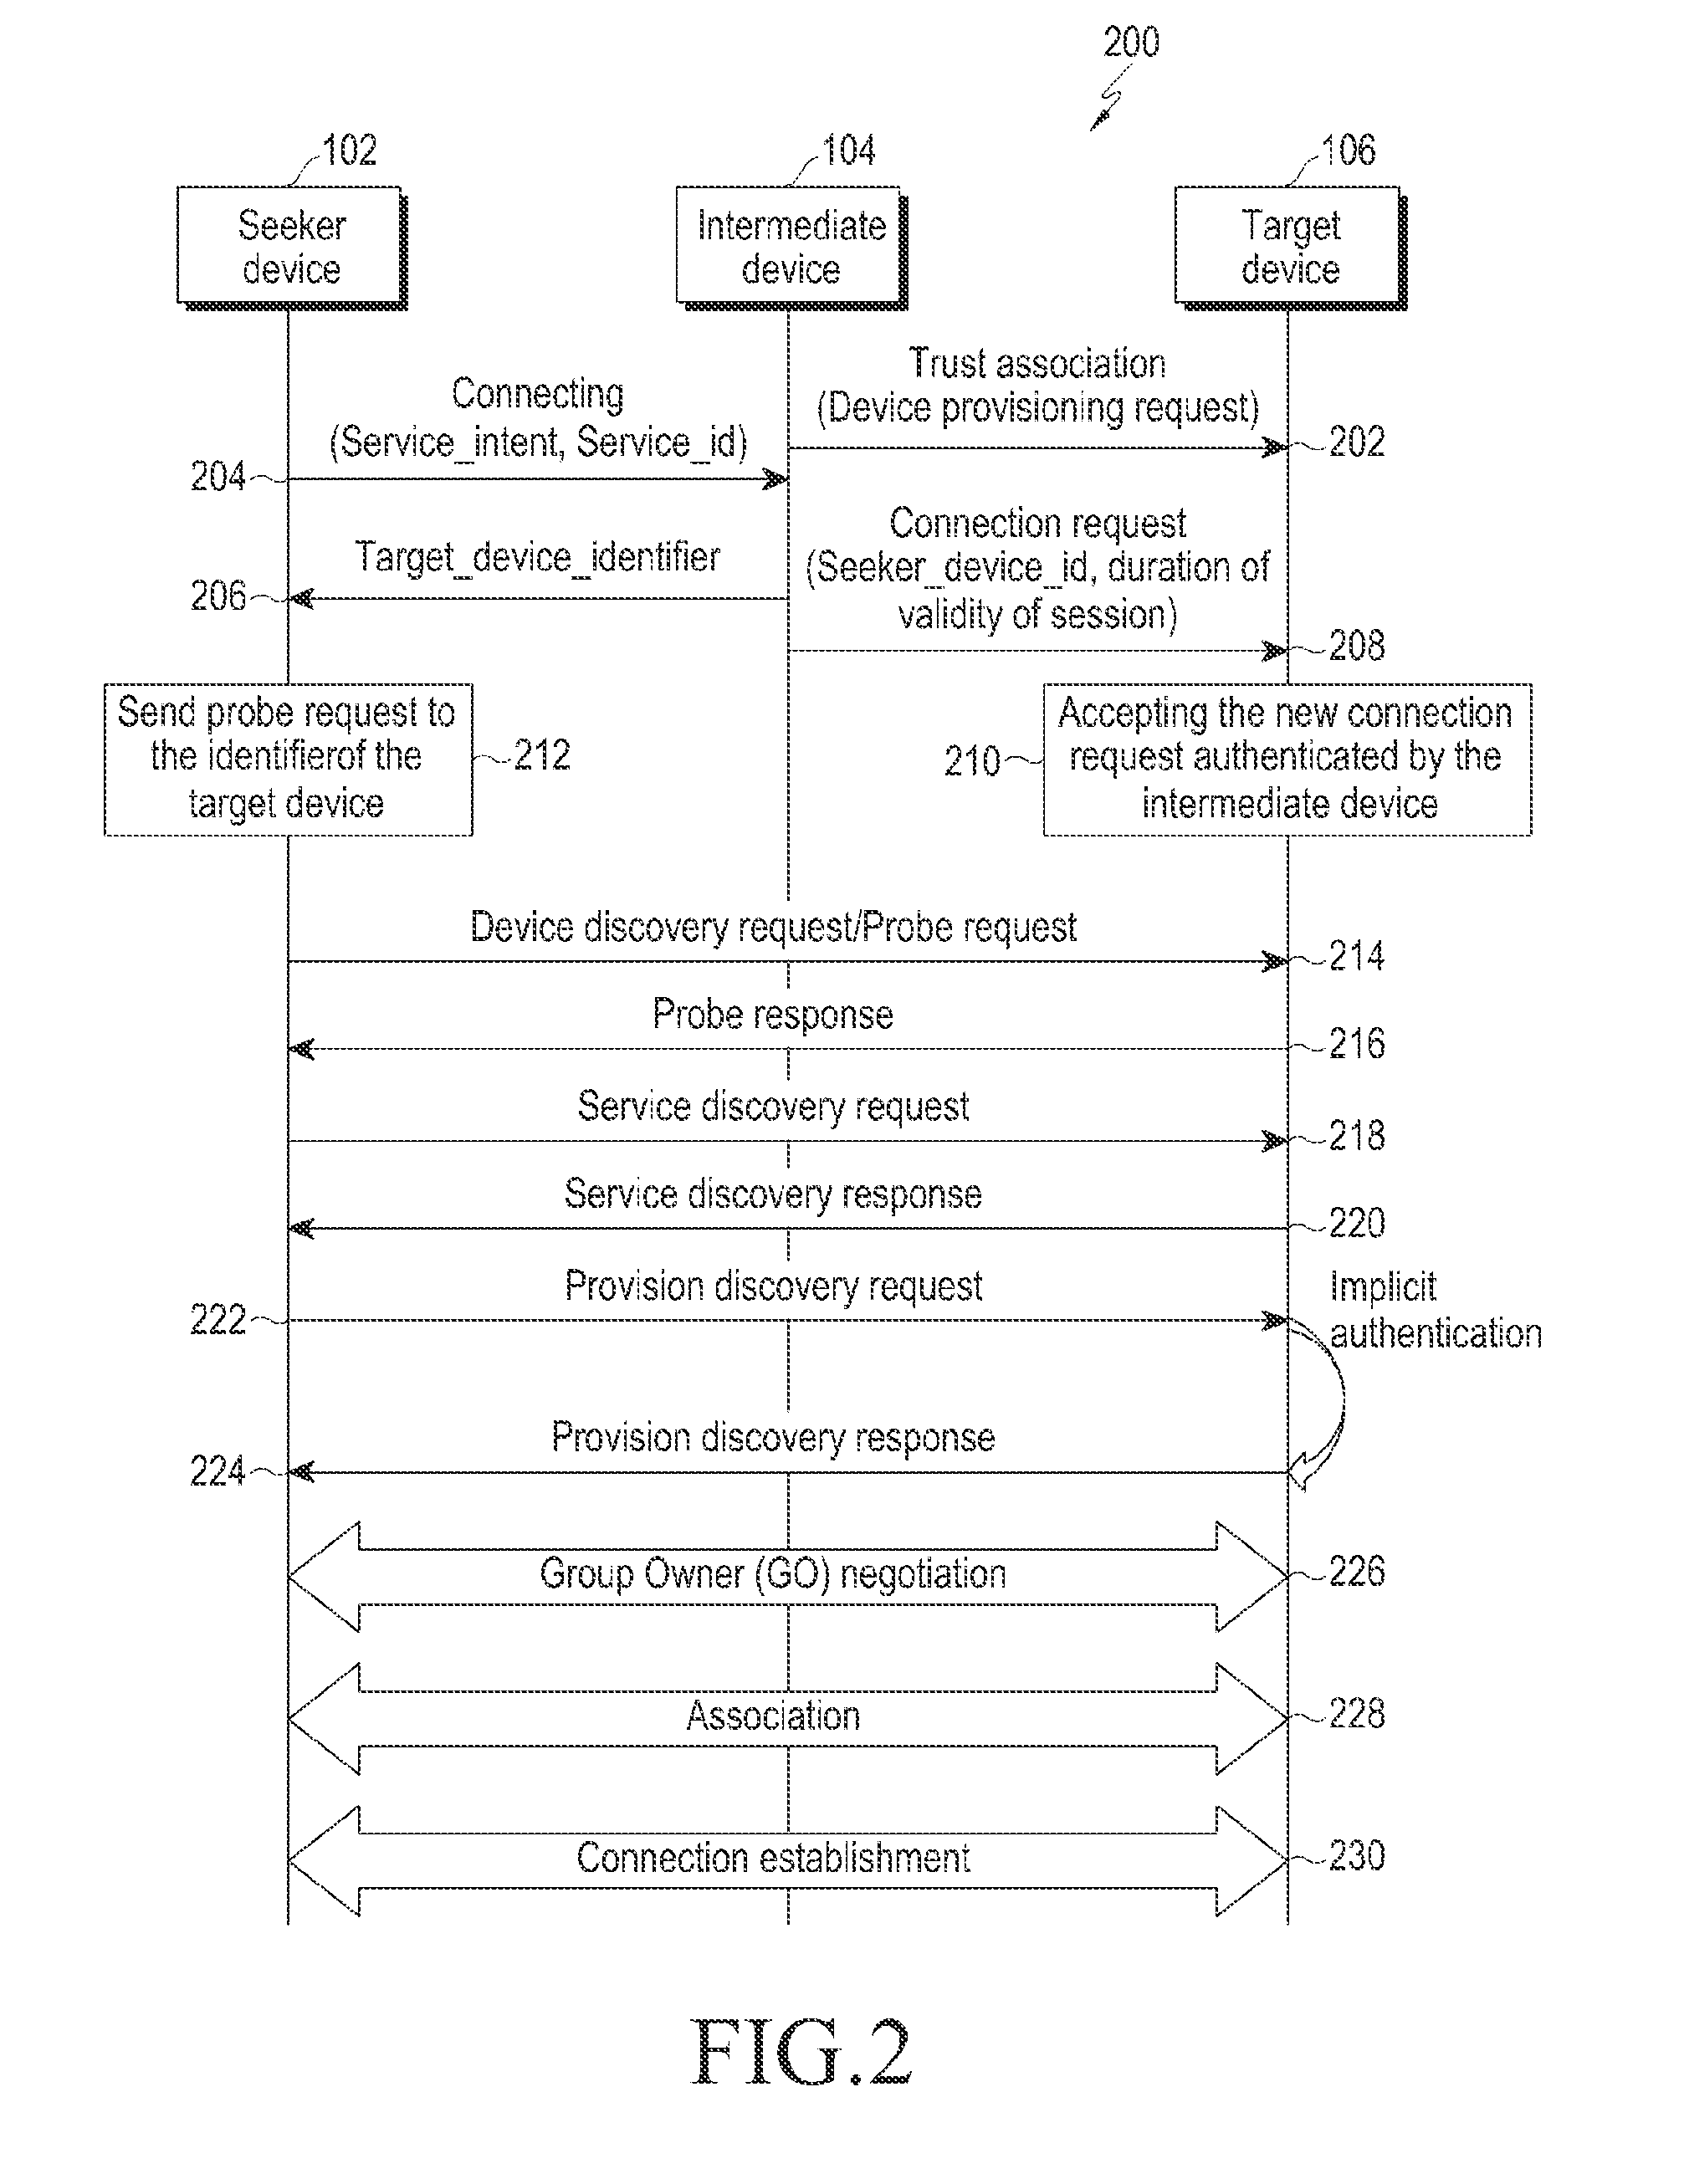 Method and system for establishing a connection between a seeker device and a target device